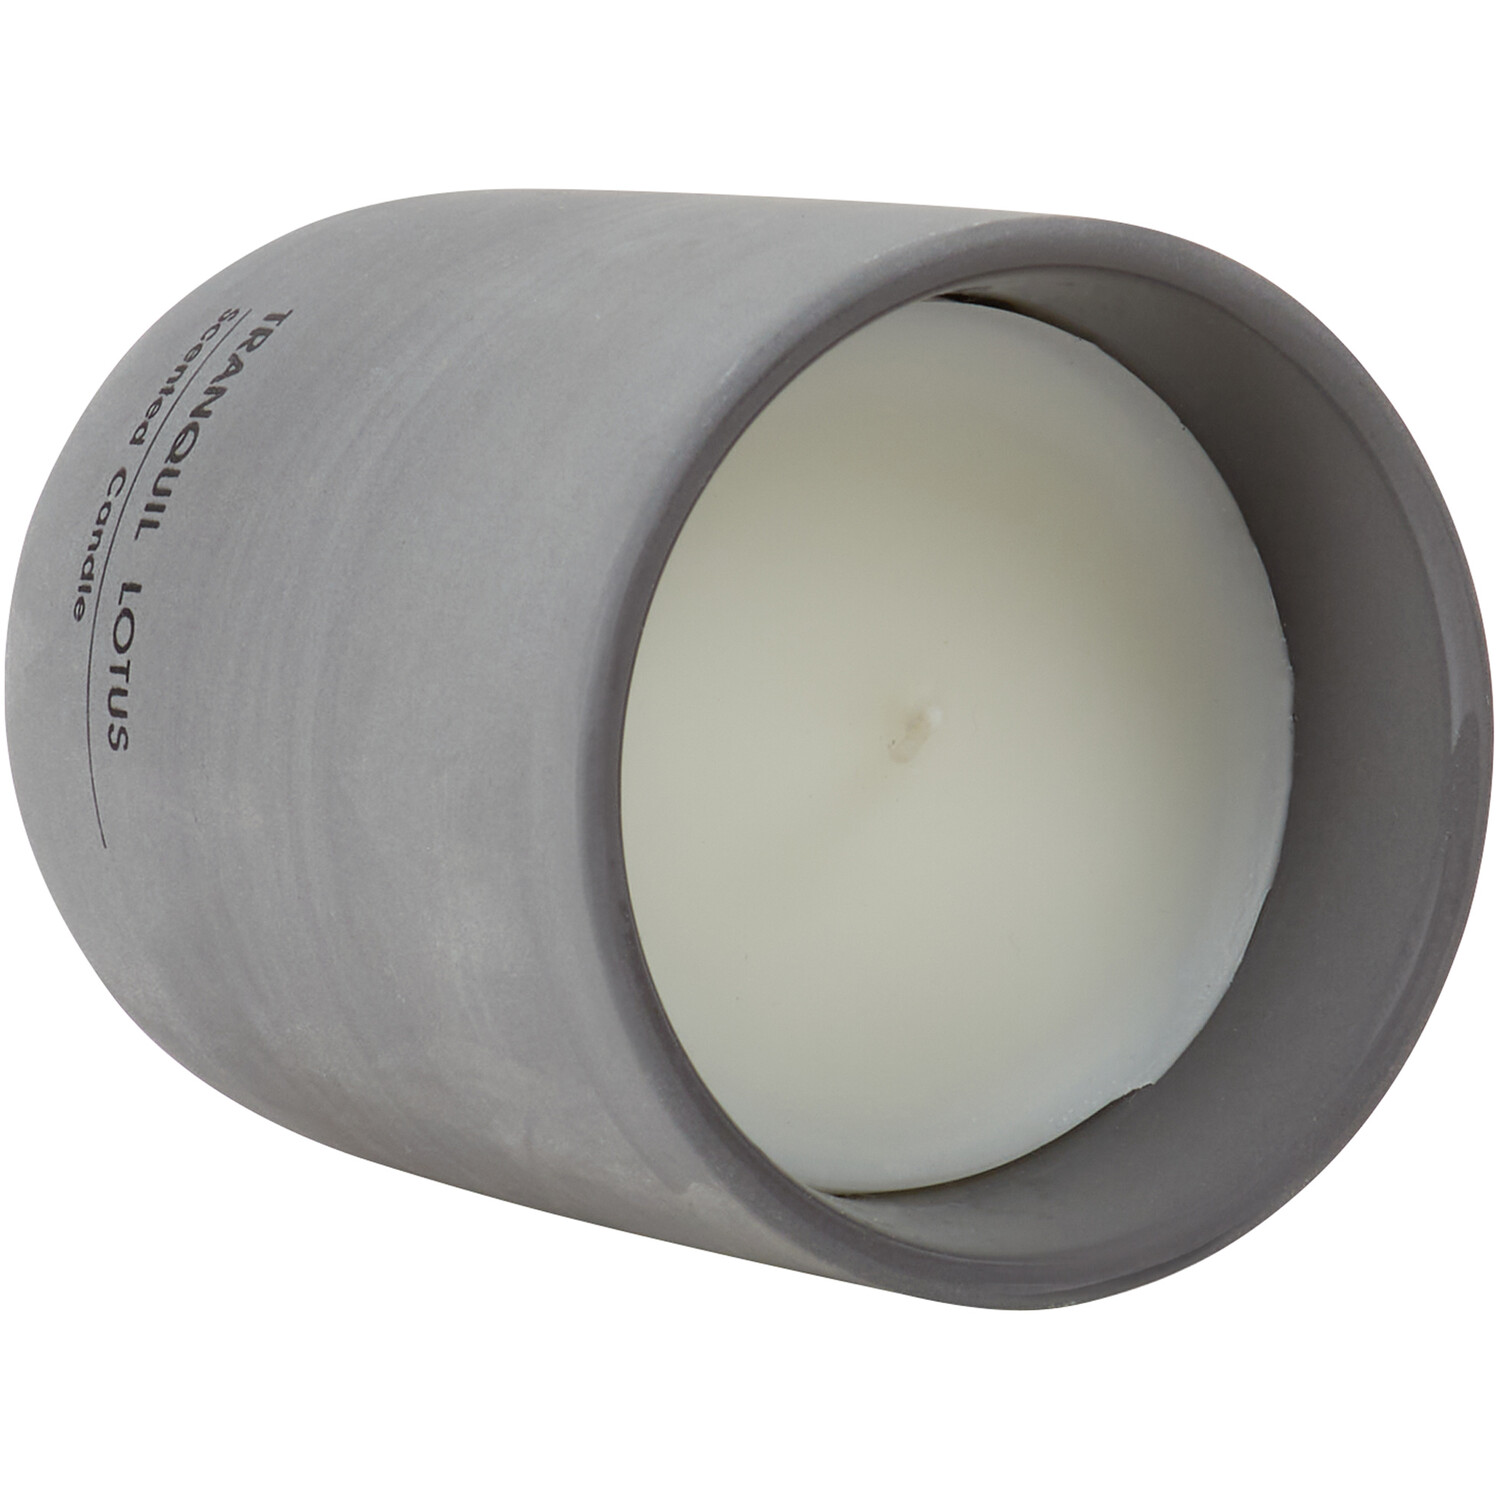 Tranquil Lotus Candle - Grey Image 4